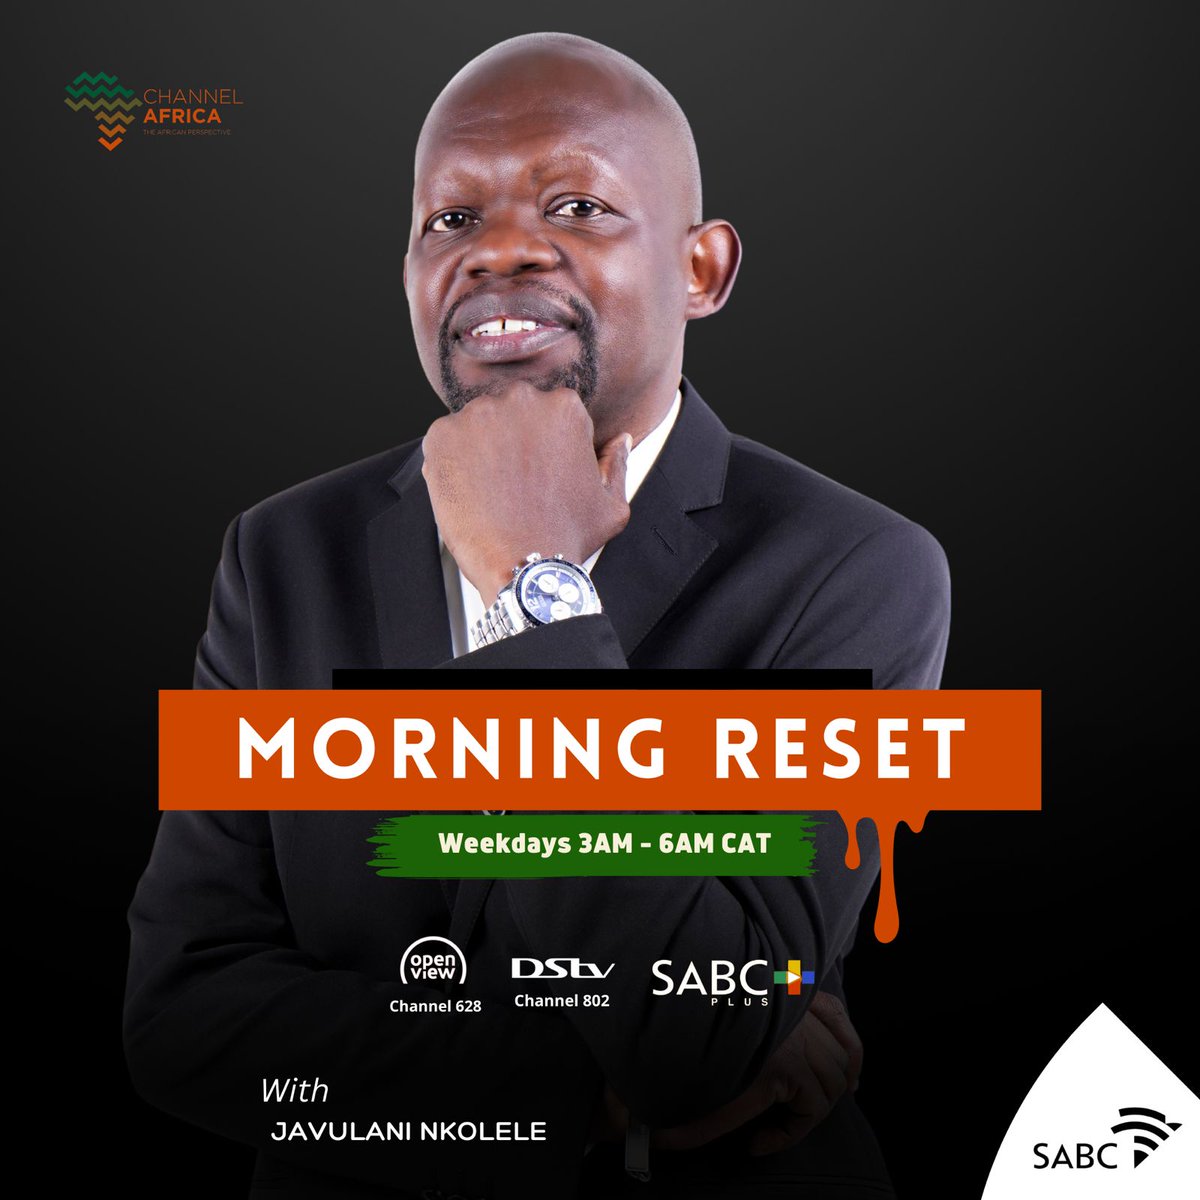 You are now tuned into the #MorningReset with
@JavulaniNkolele until 06:00 CAT.  Tune in:

Tune in: @SABCPlus app | DSTV 802| Open View 628

Stream: bit.ly/Listen2Channel…

#ChannelAfrica